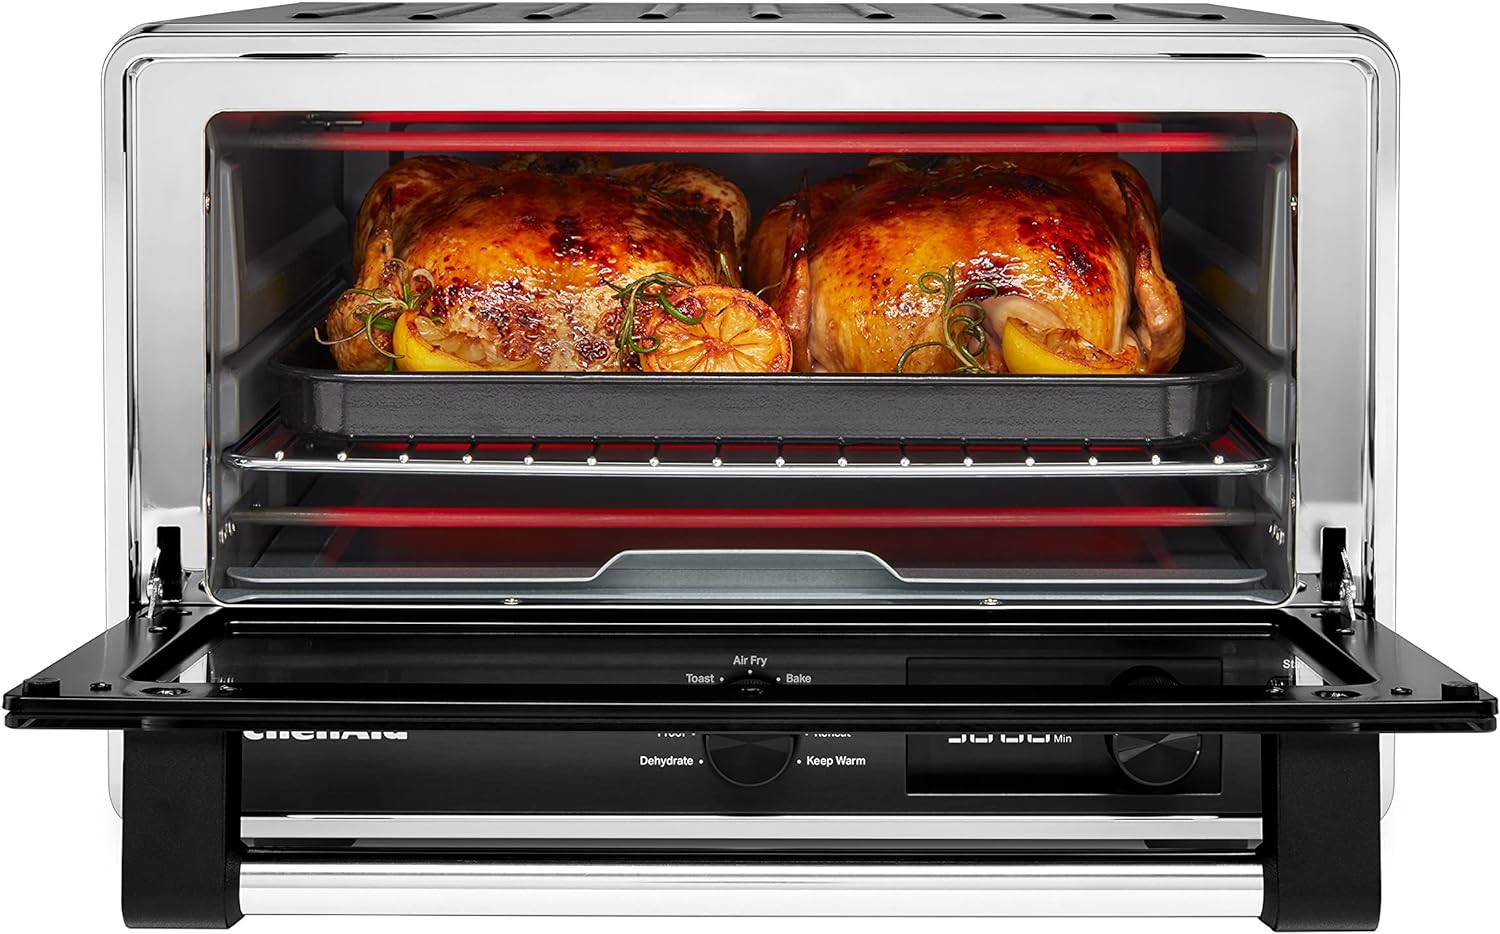 KitchenAid Digital Countertop Oven with Air Fry - A Versatile Kitchen Appliance Review